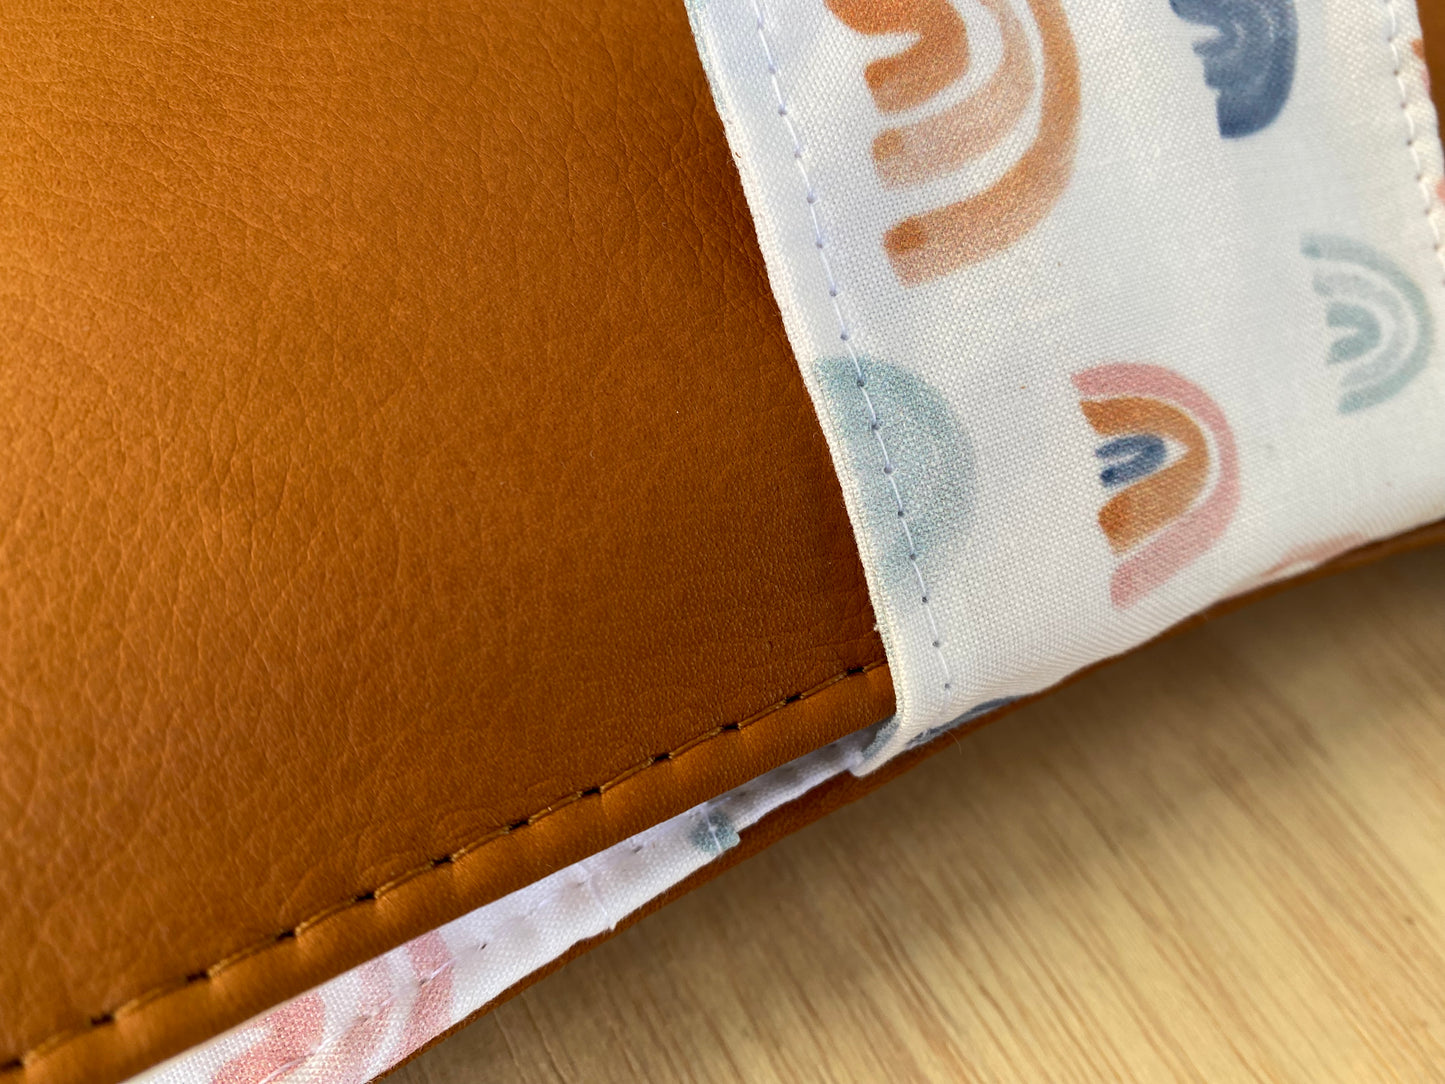 Leather nappy wallet